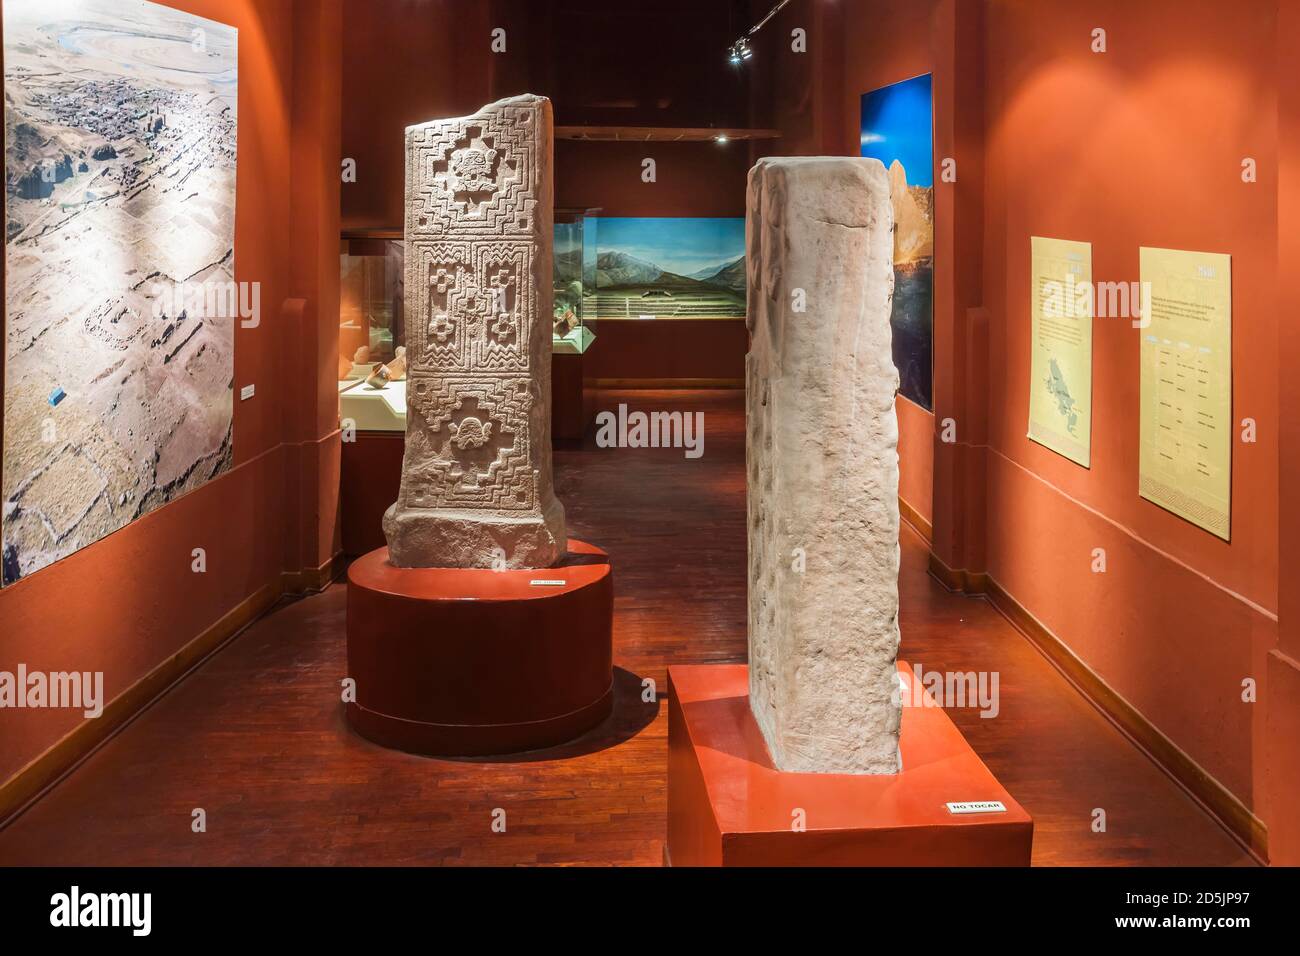 Formative period collection gallery, and stelas, 'National Museum of Archaeology, Anthropology and History of Peru', Lima, Peru, South America Stock Photo